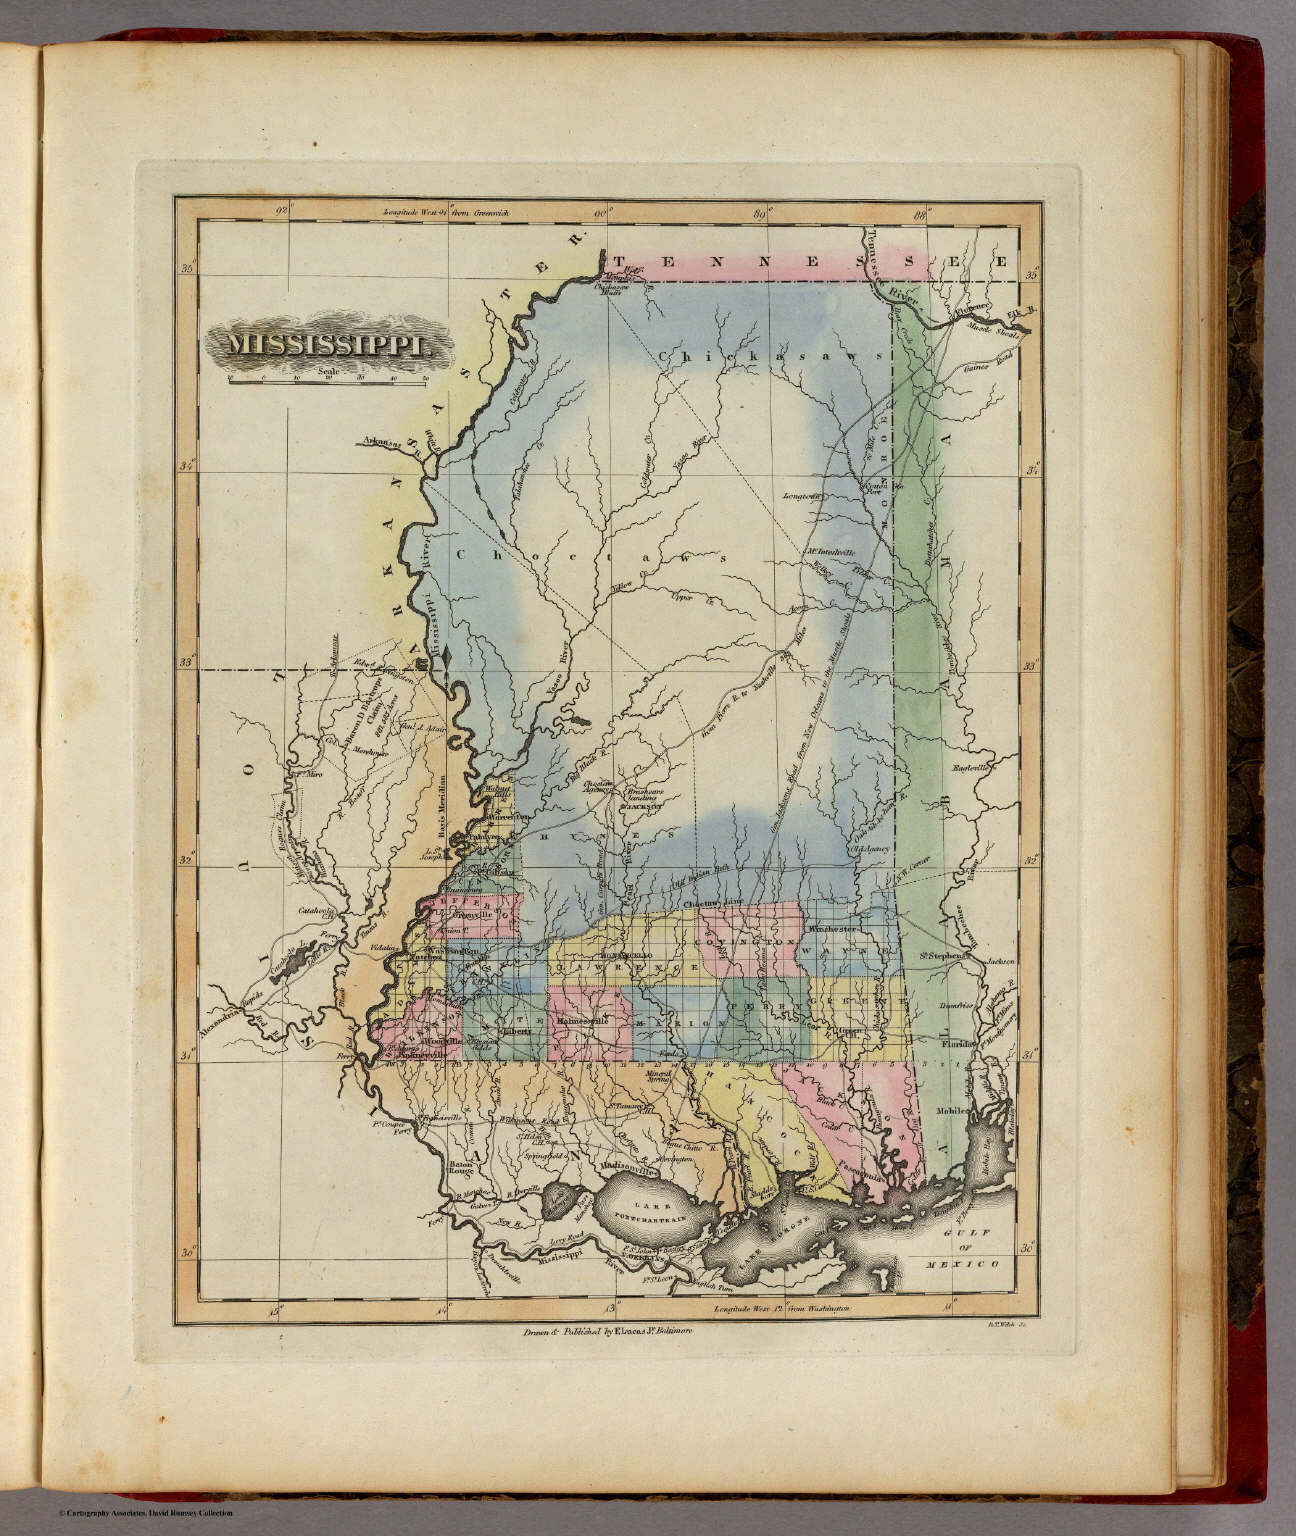 Mississippi David Rumsey Historical Map Collection 5191